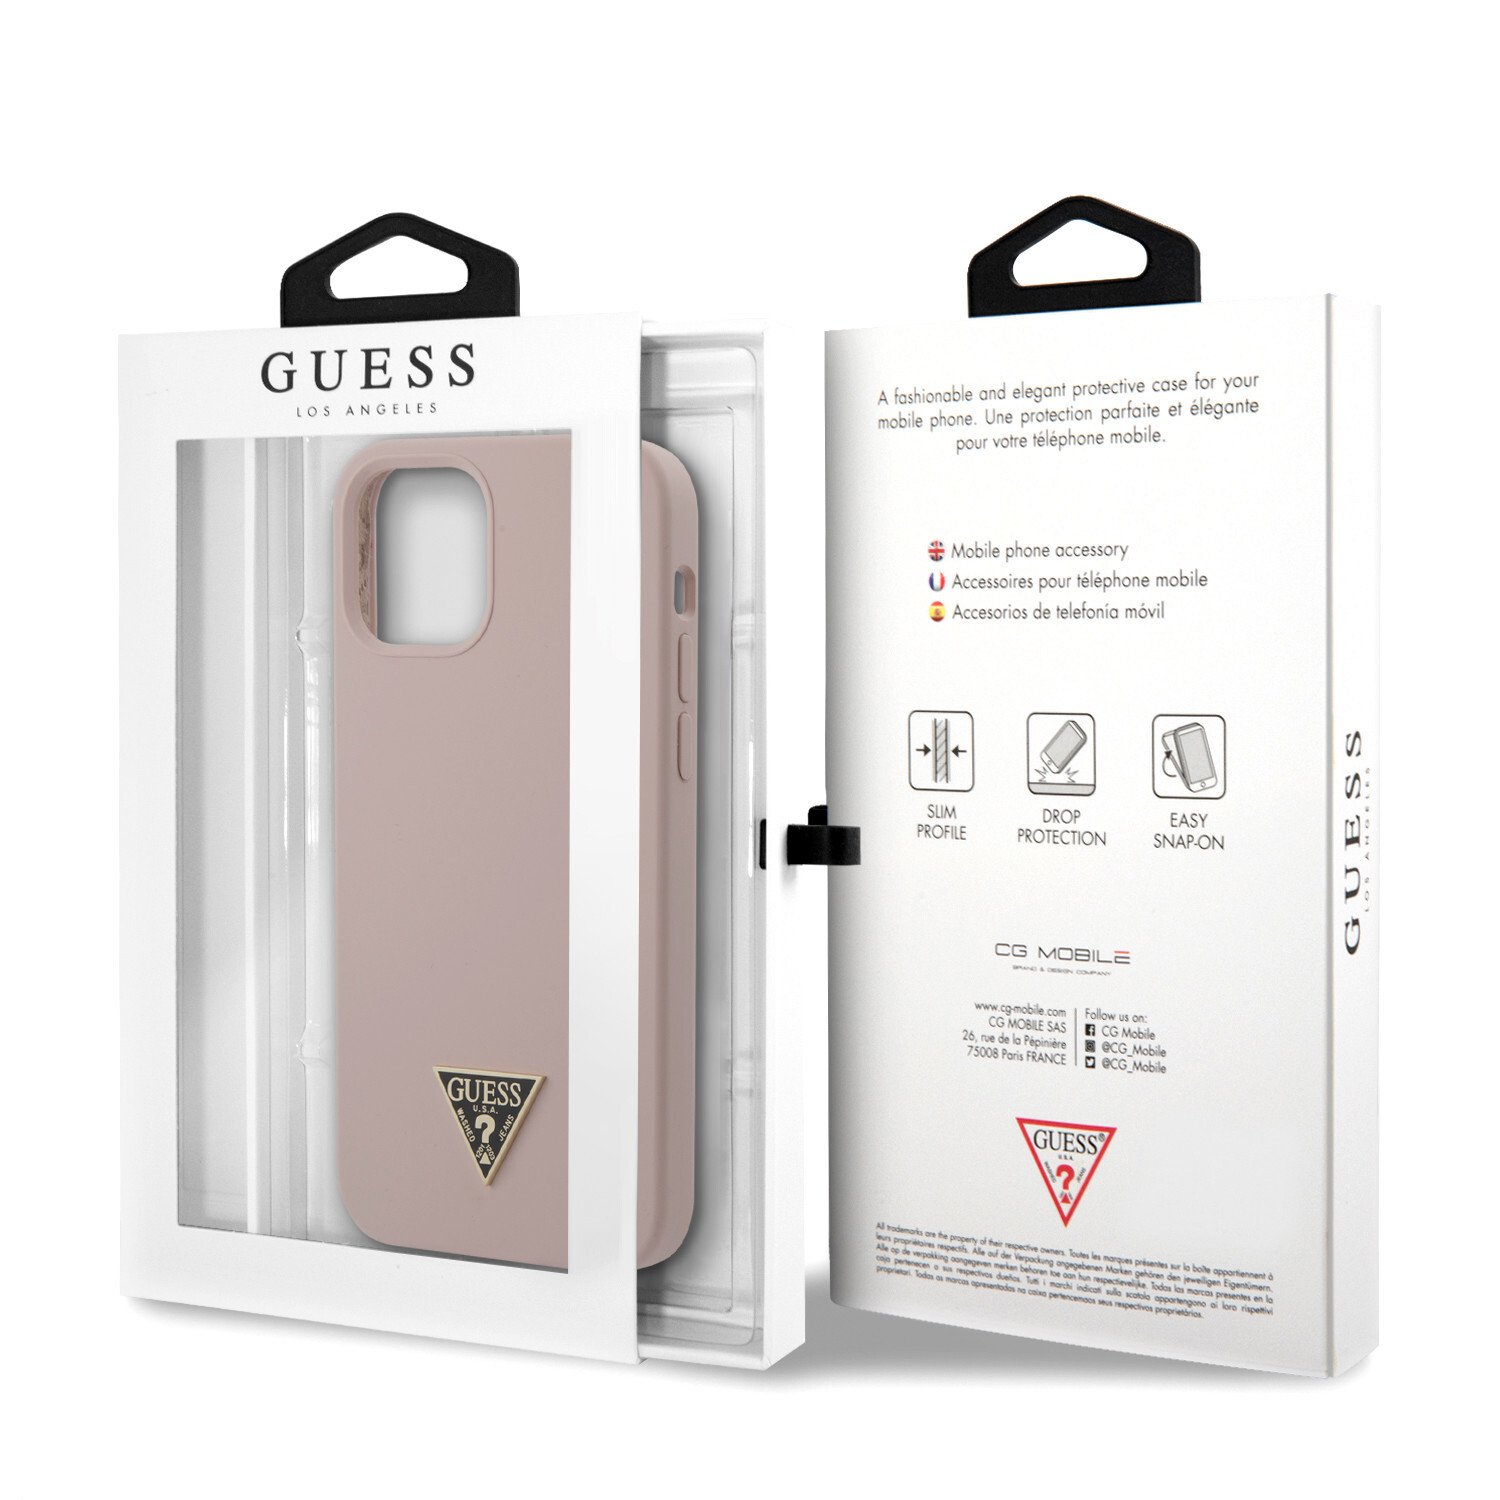 Husa Cover Guess Silicone Metal Triangle pentru iPhone 12 Pro Max Light Pink thumb